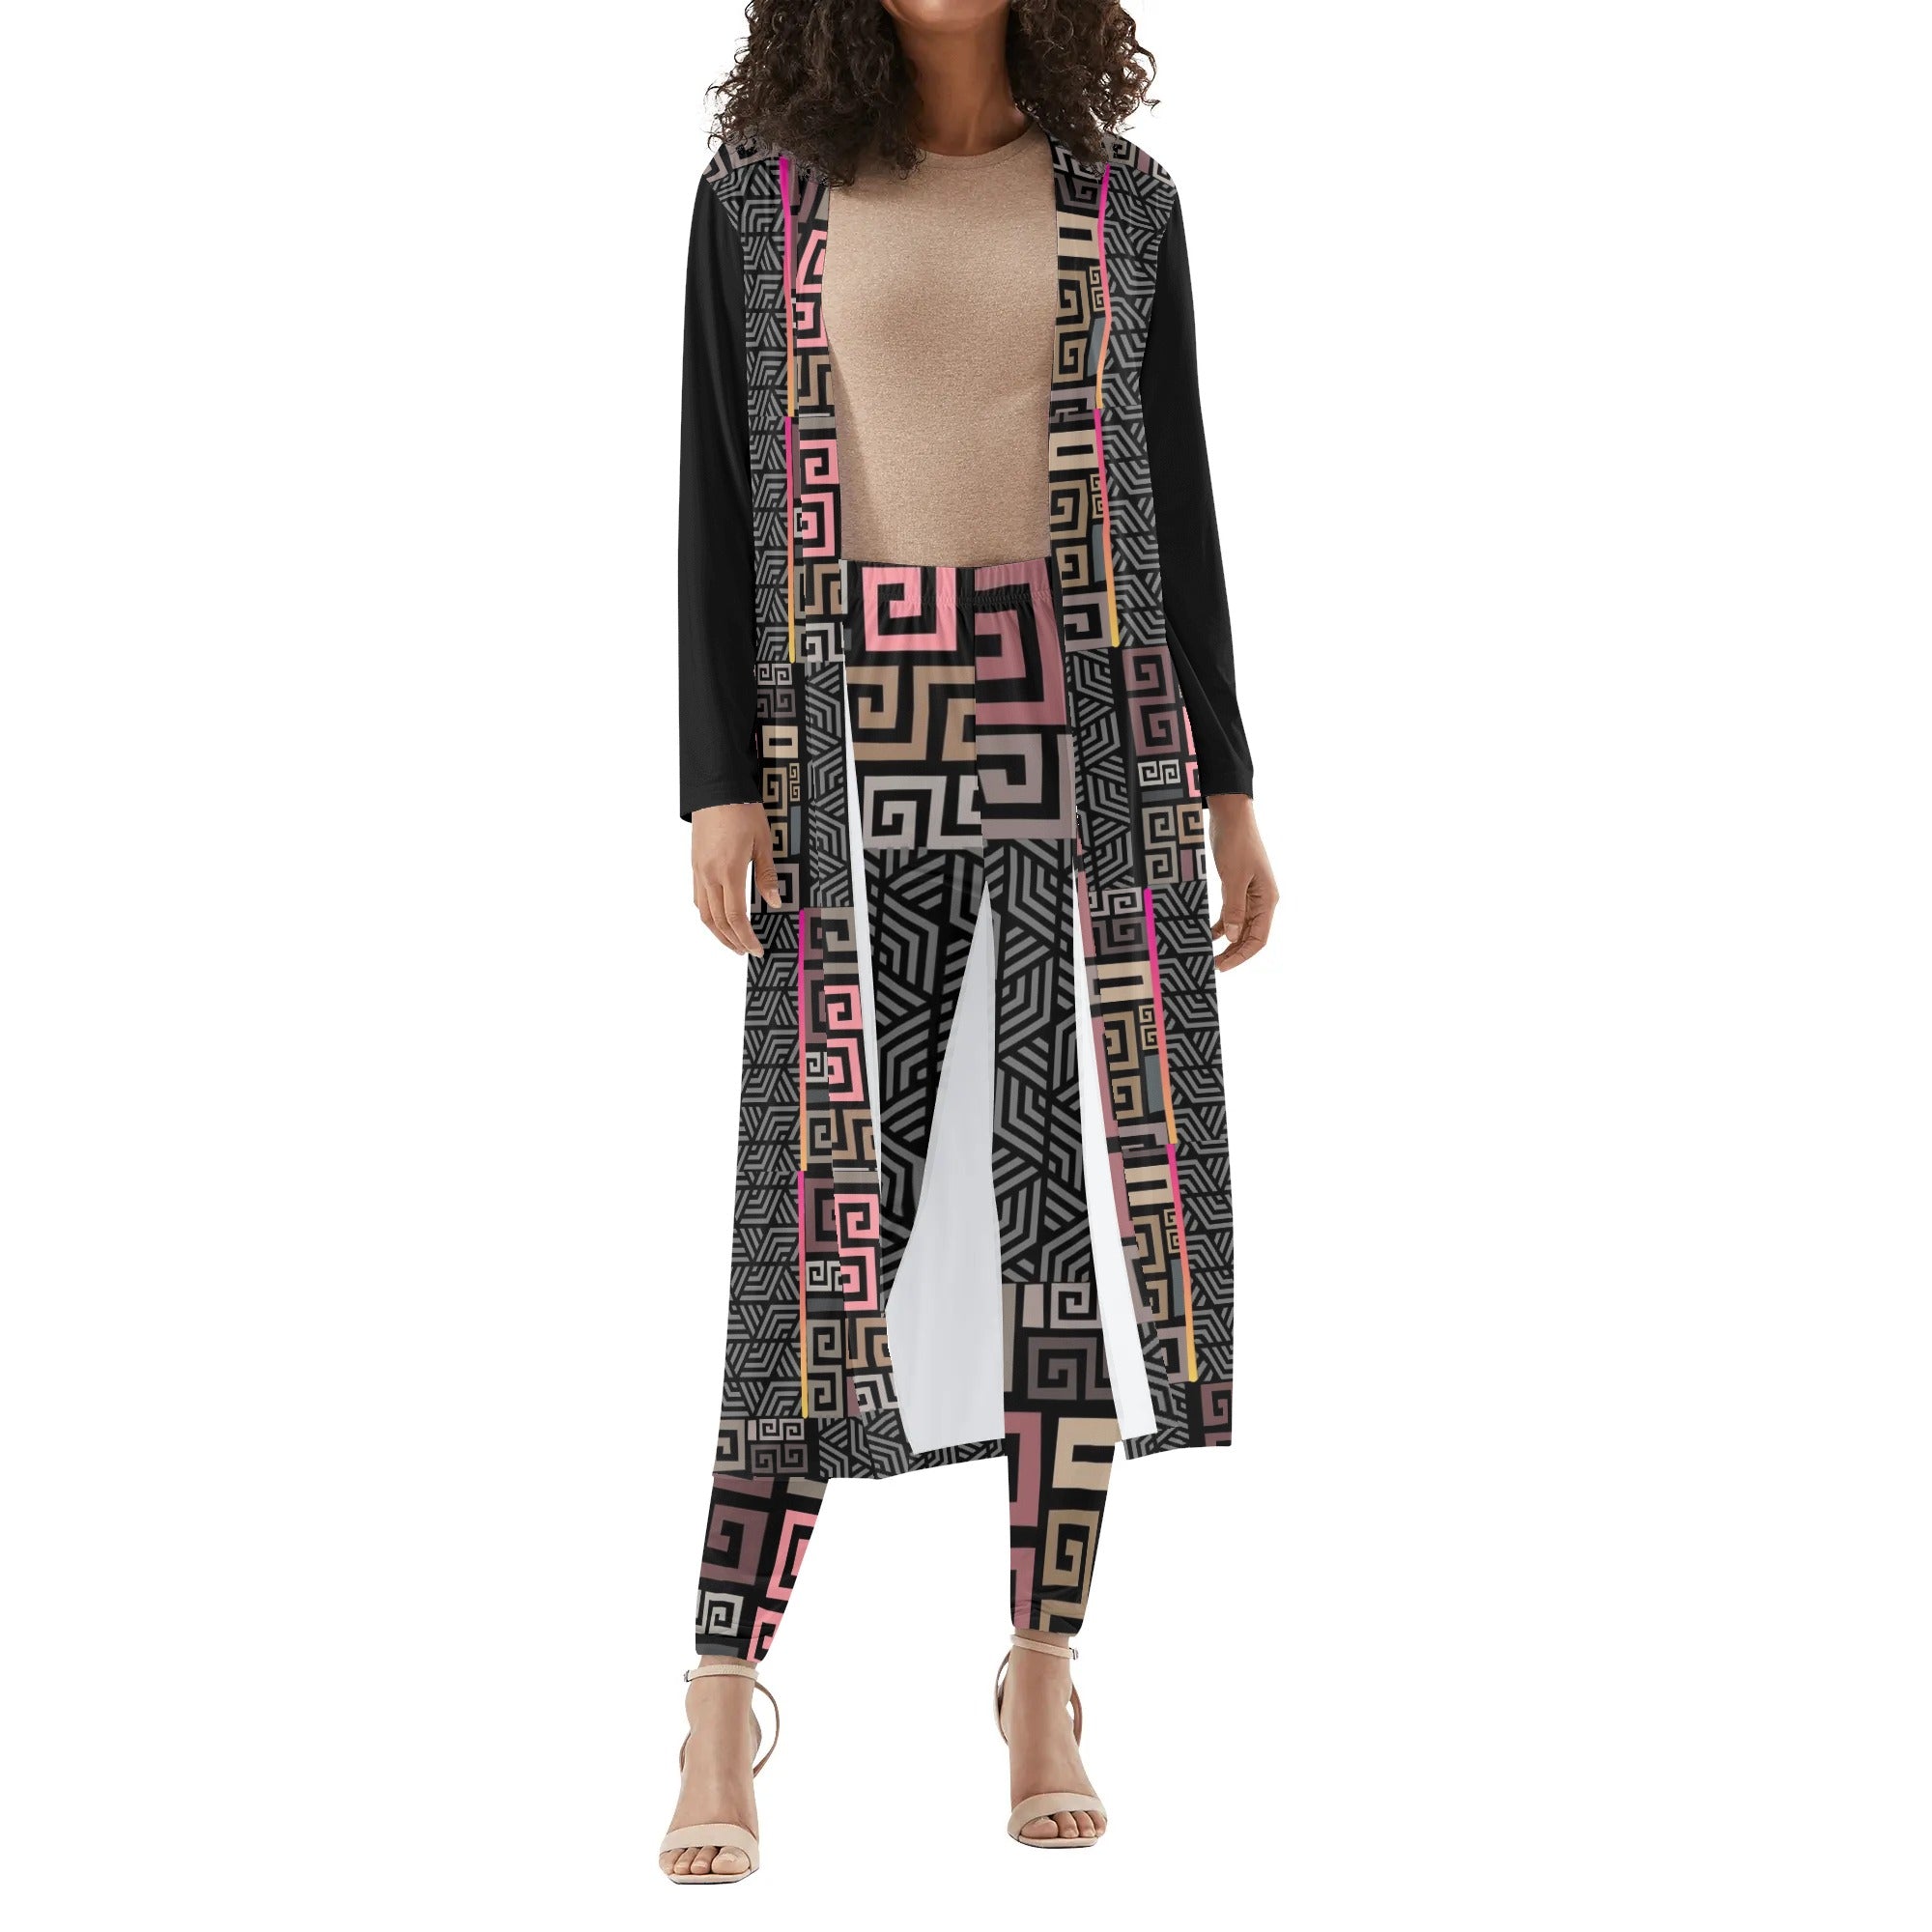 Squared Womens Long Sleeve Cardigan and Leggings Outfit Sets